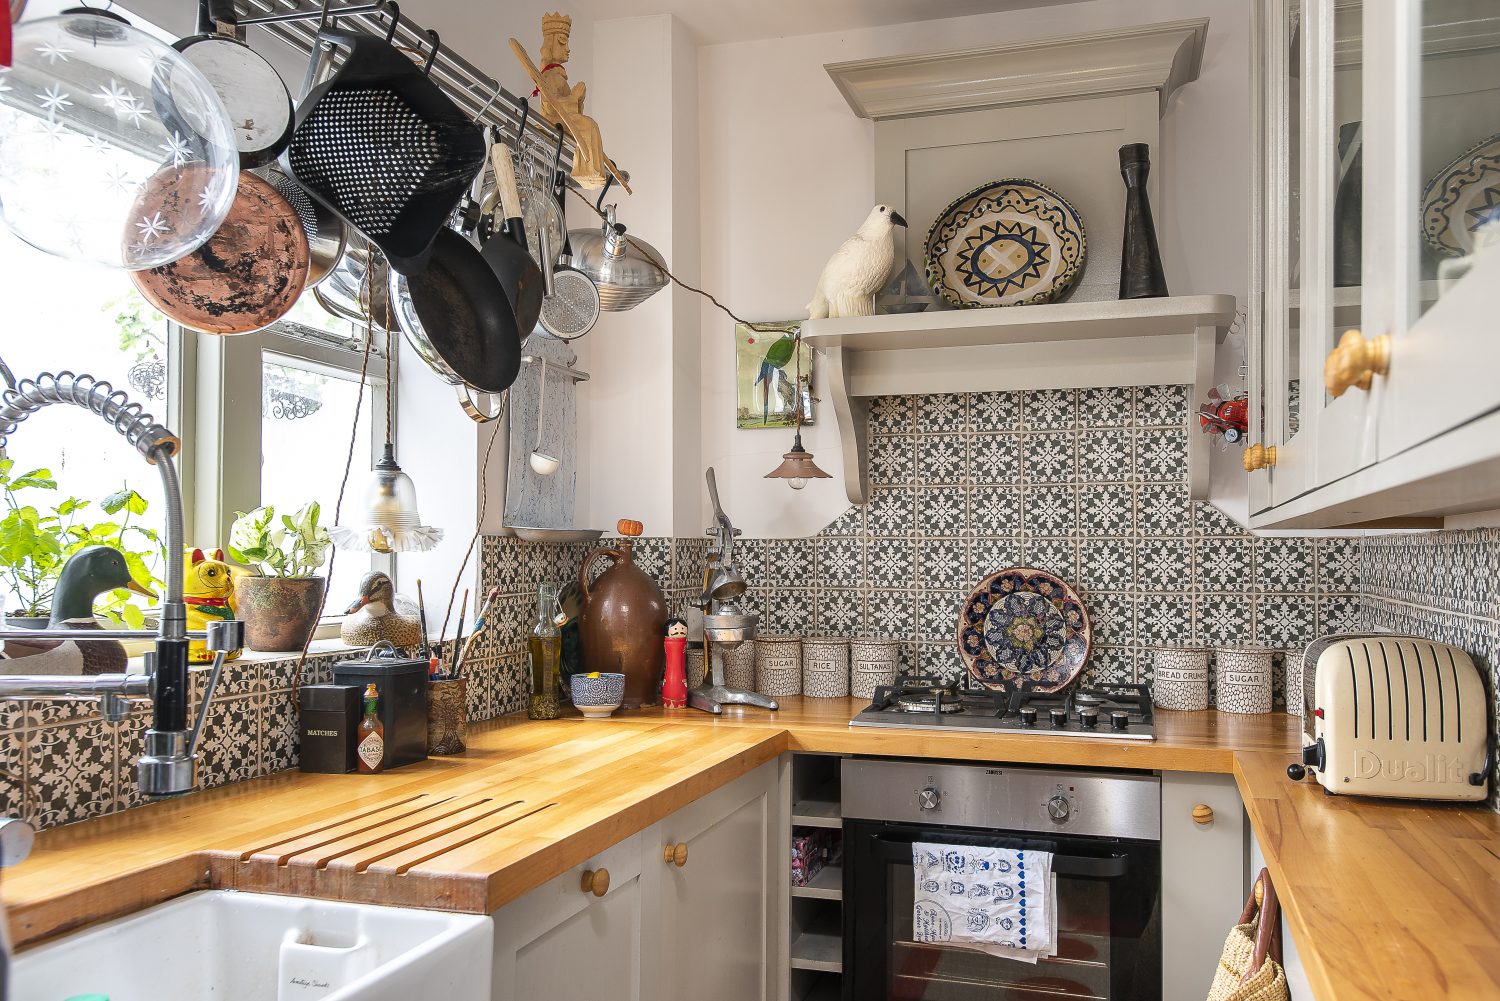 In the kitchen, Sally has found room to pack in plenty of her magical objects, including some lifesize wooden ducks and a large metal orange squeezer, that she brought back from Mexico